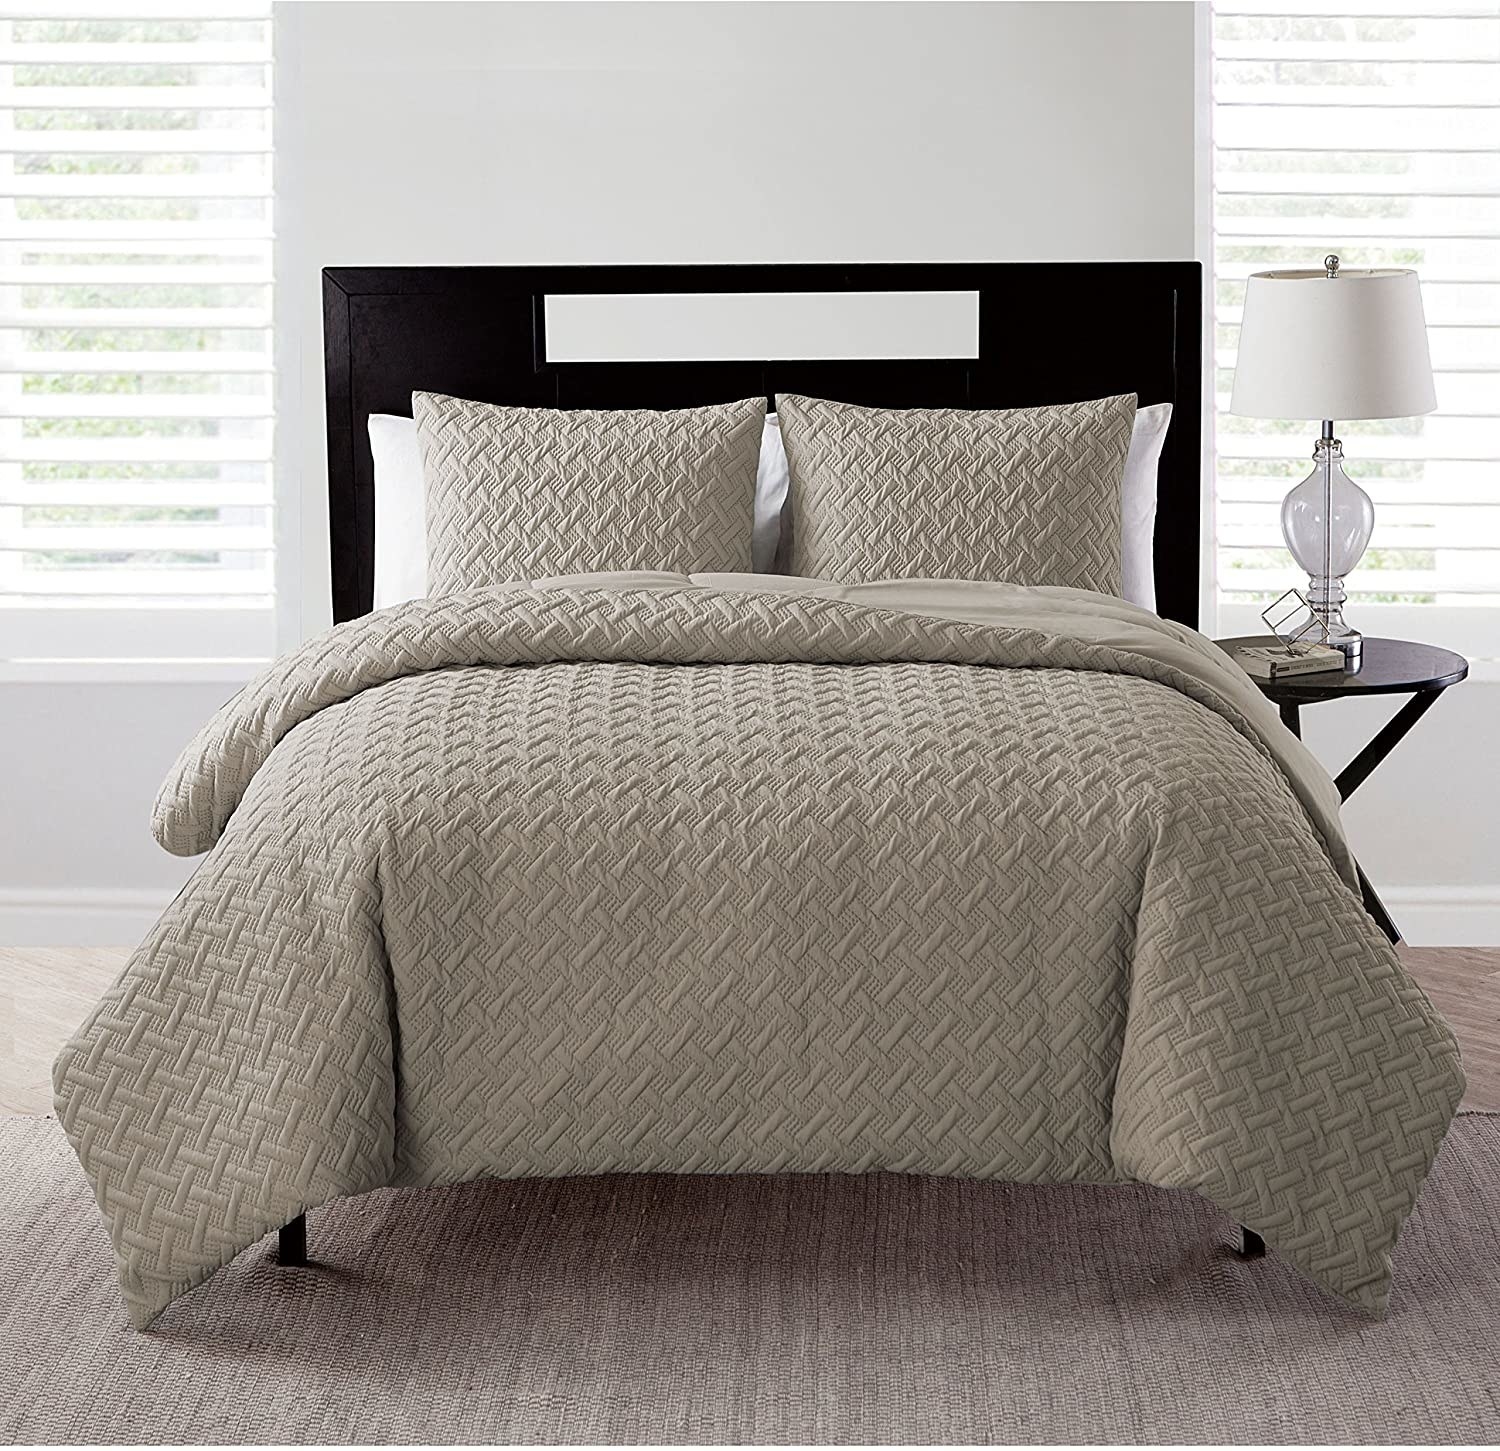 The VCNY Home Nina Collection bedding set on a made bed in taupe